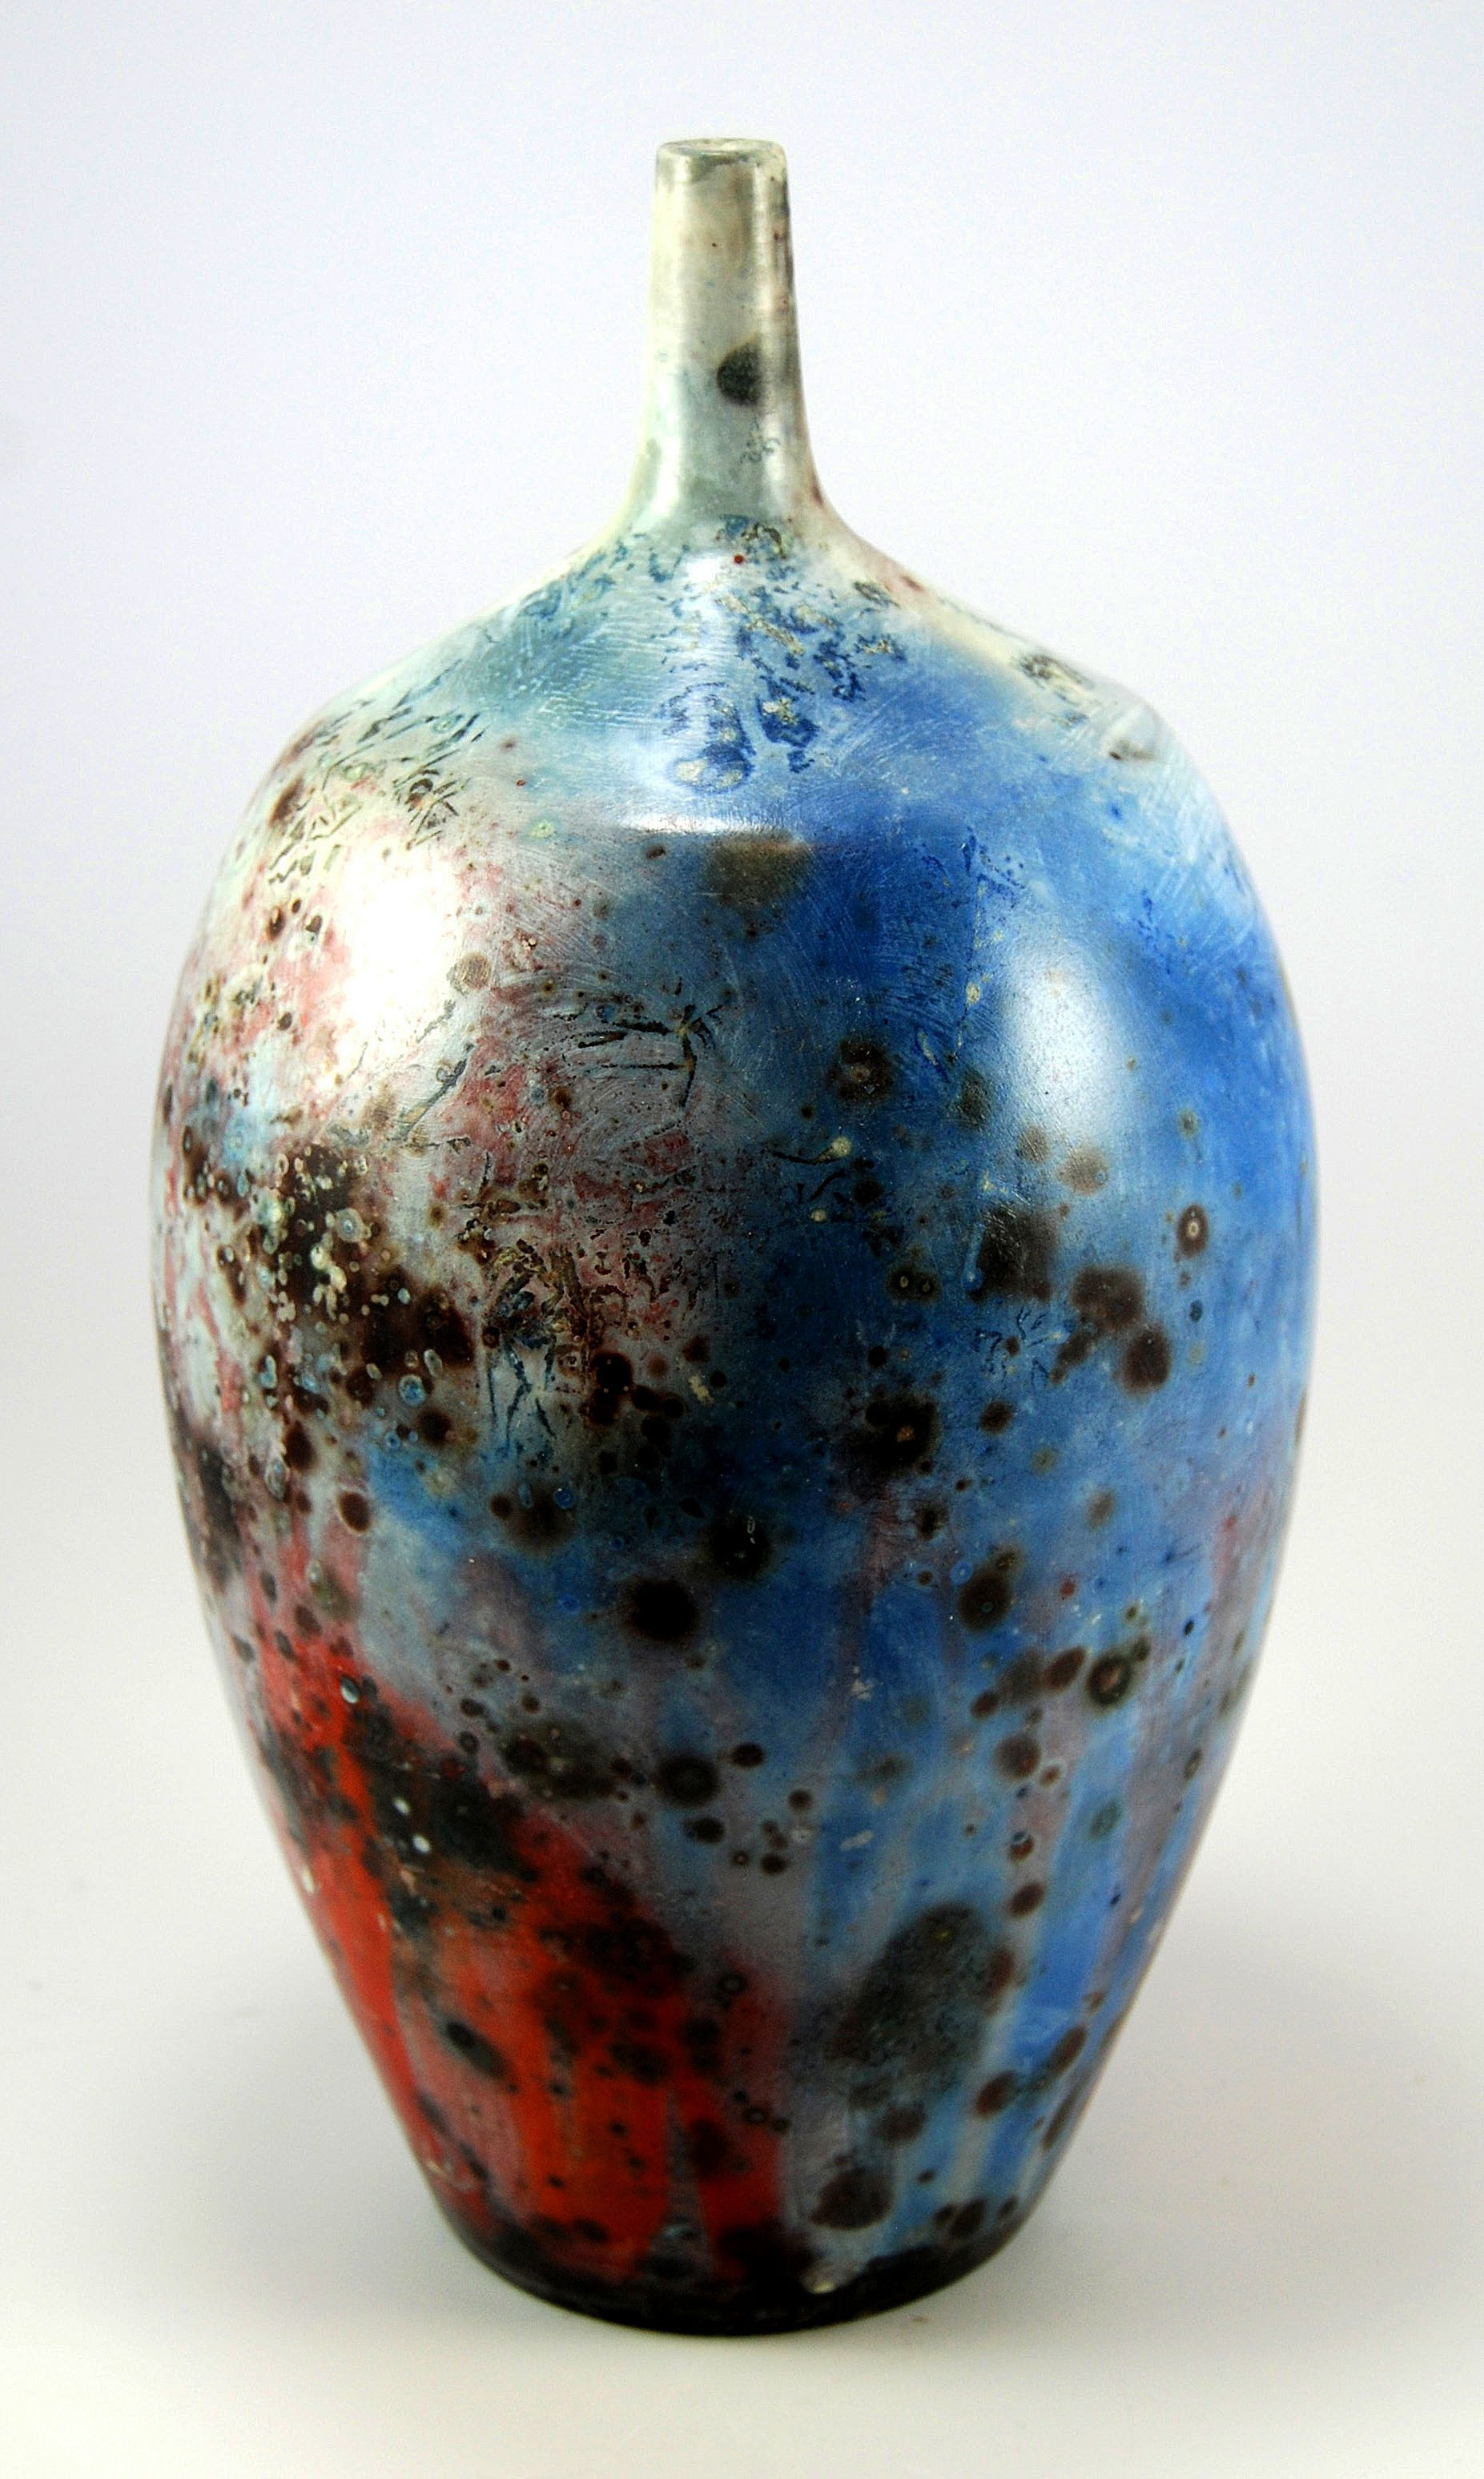 10 Ideal Narrow Neck Vase 2024 free download narrow neck vase of skinny neck vase blue and red with black spatter pattern blue with skinny neck vase blue and red with black spatter pattern